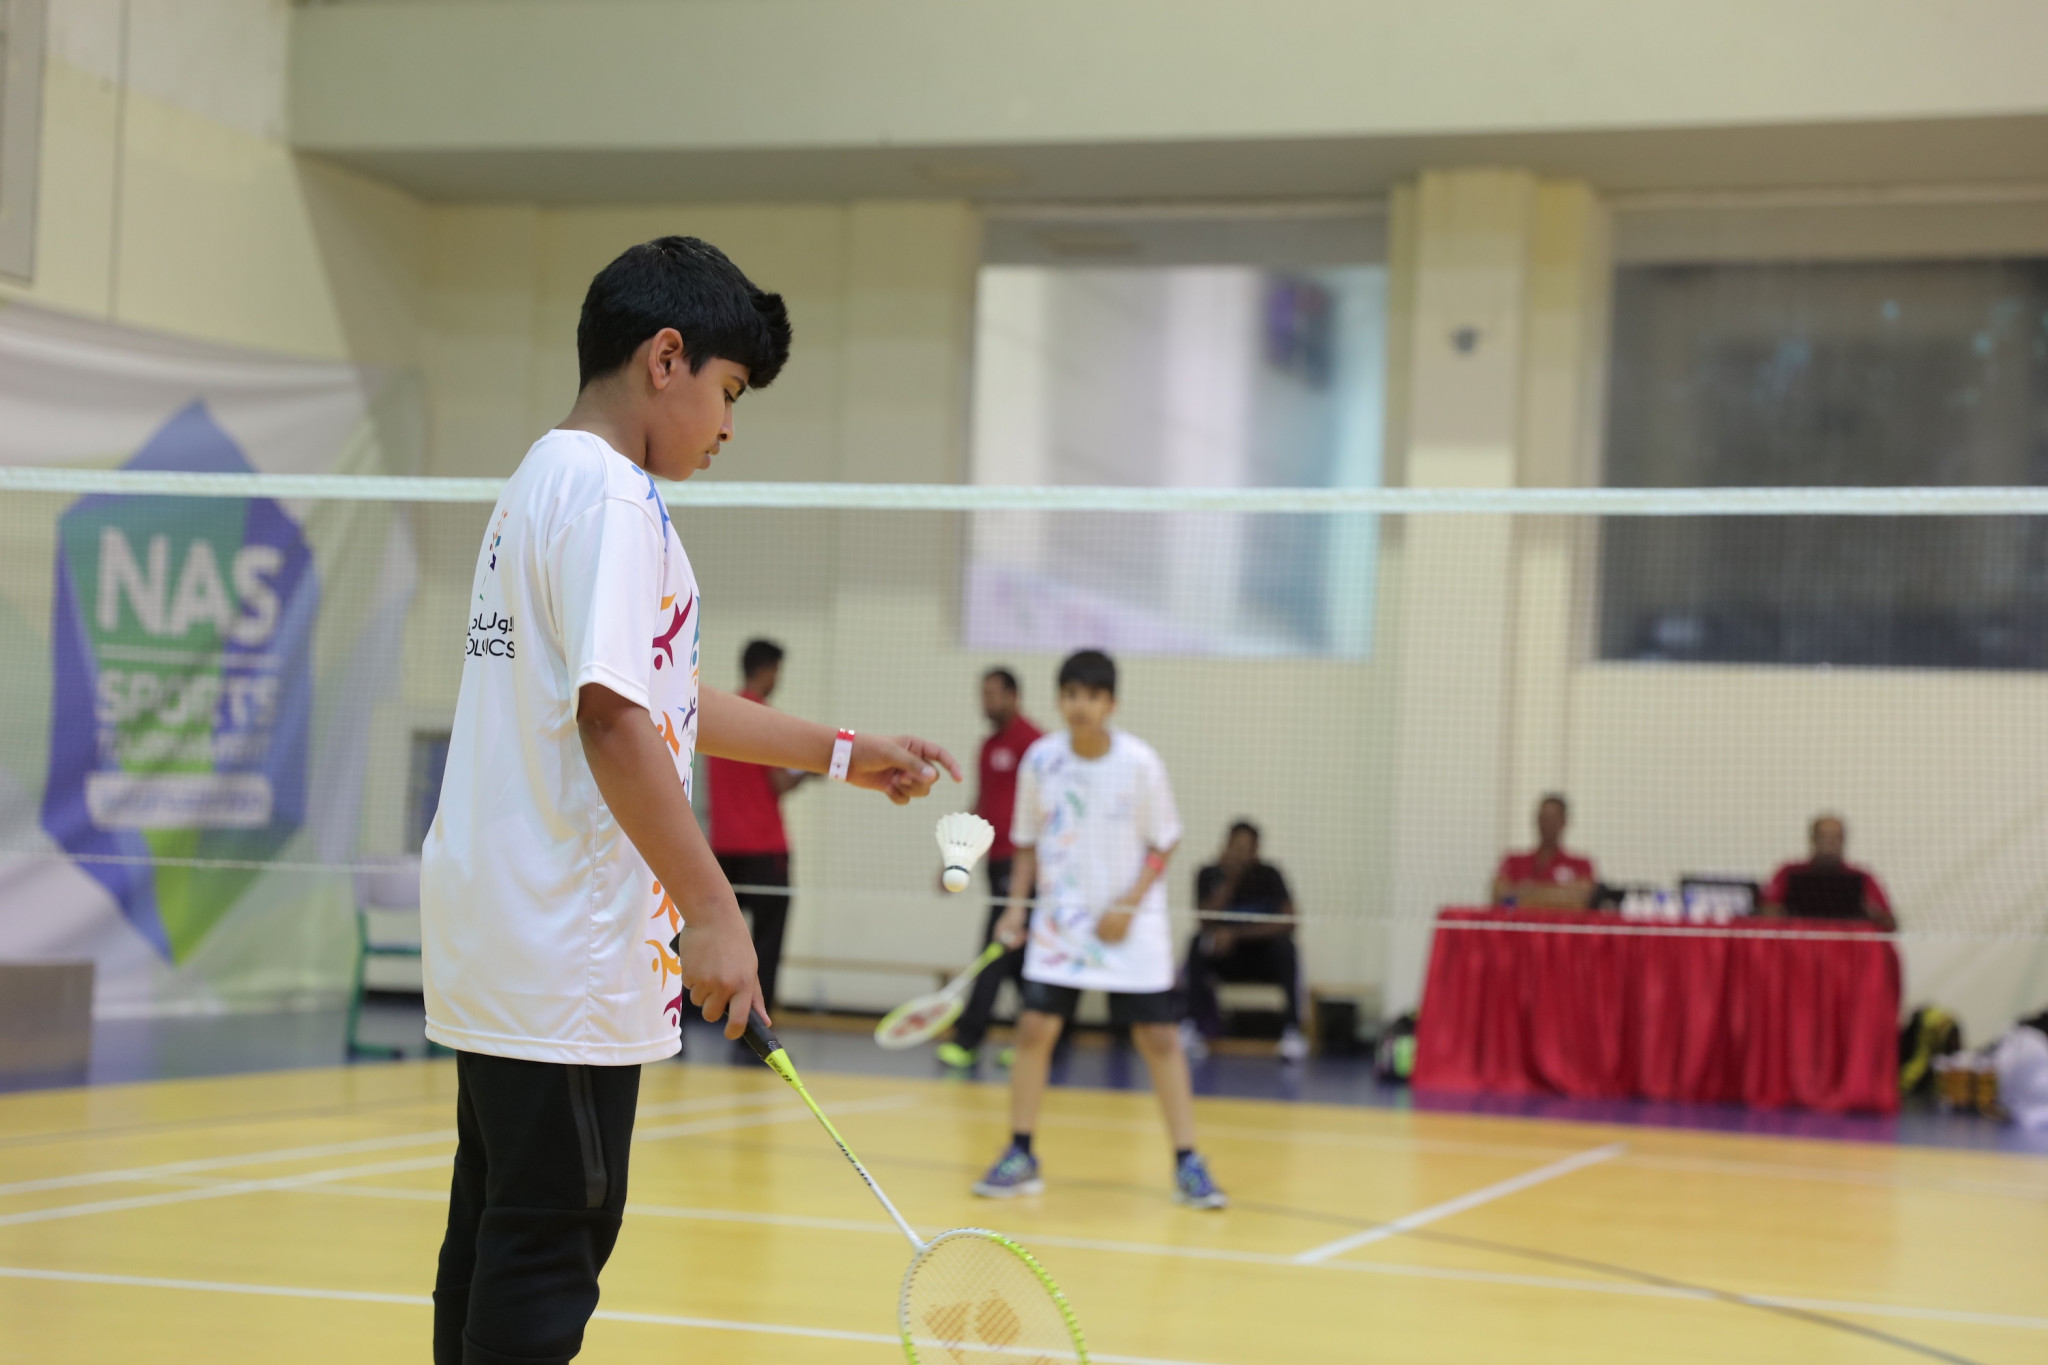 A series of sporting activities took place during the day ©UAE NOC